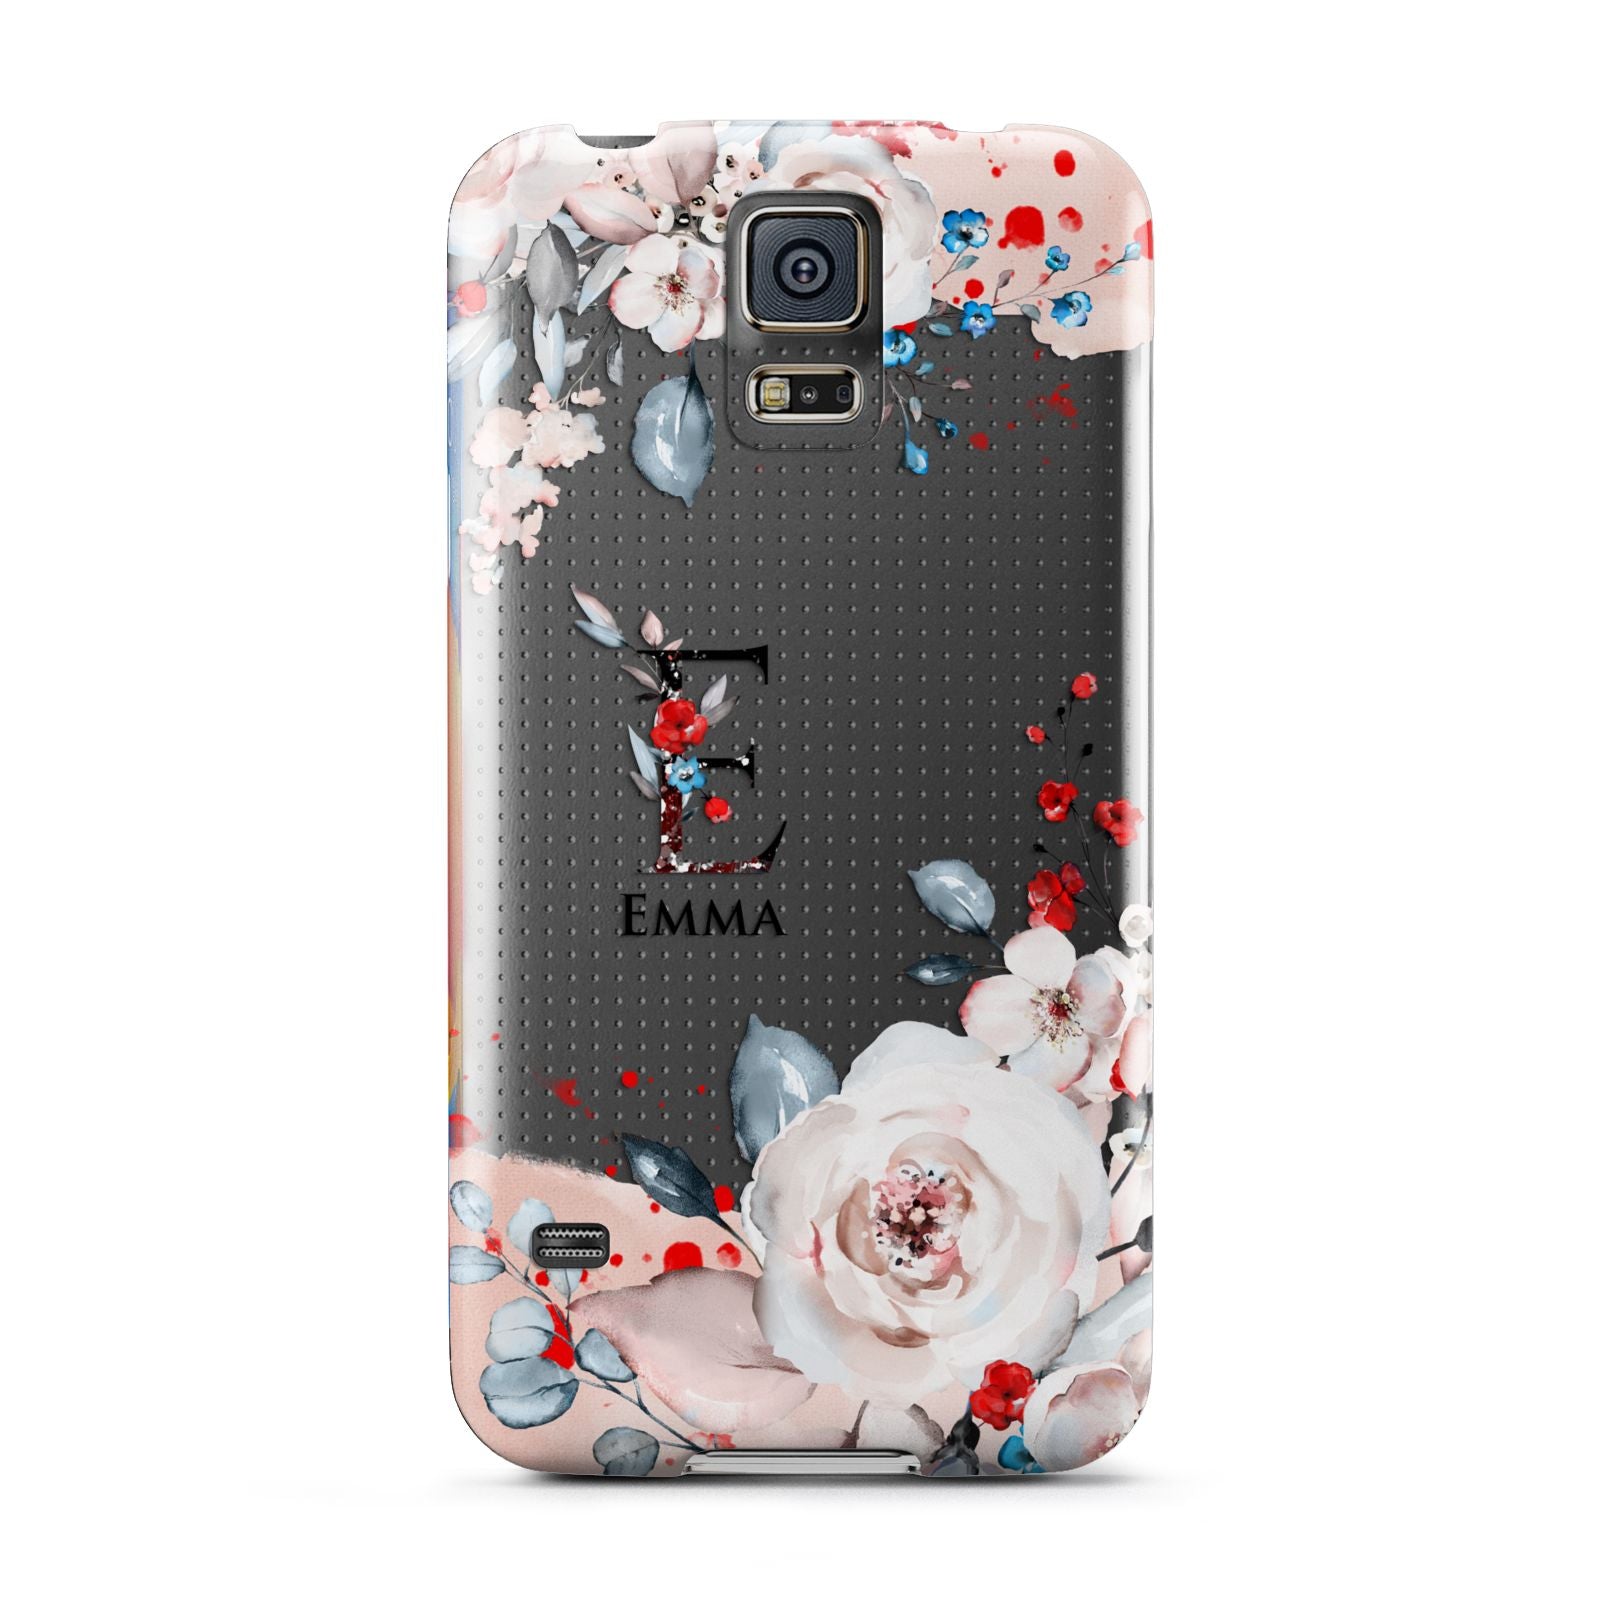 Monogrammed Roses Floral Wreath Samsung Galaxy S5 Case